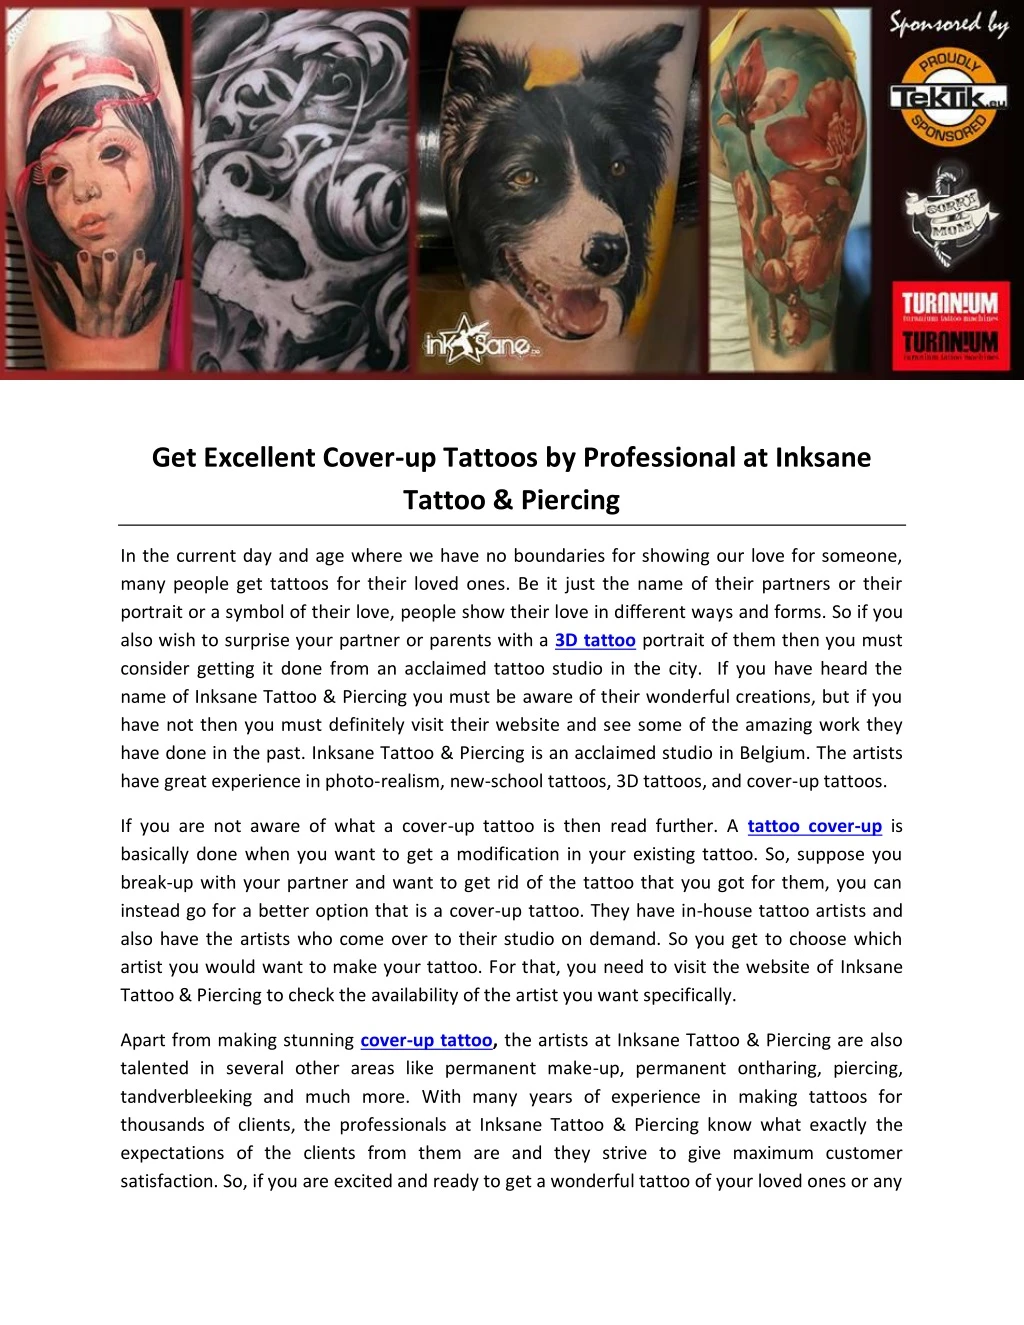 get excellent cover up tattoos by professional